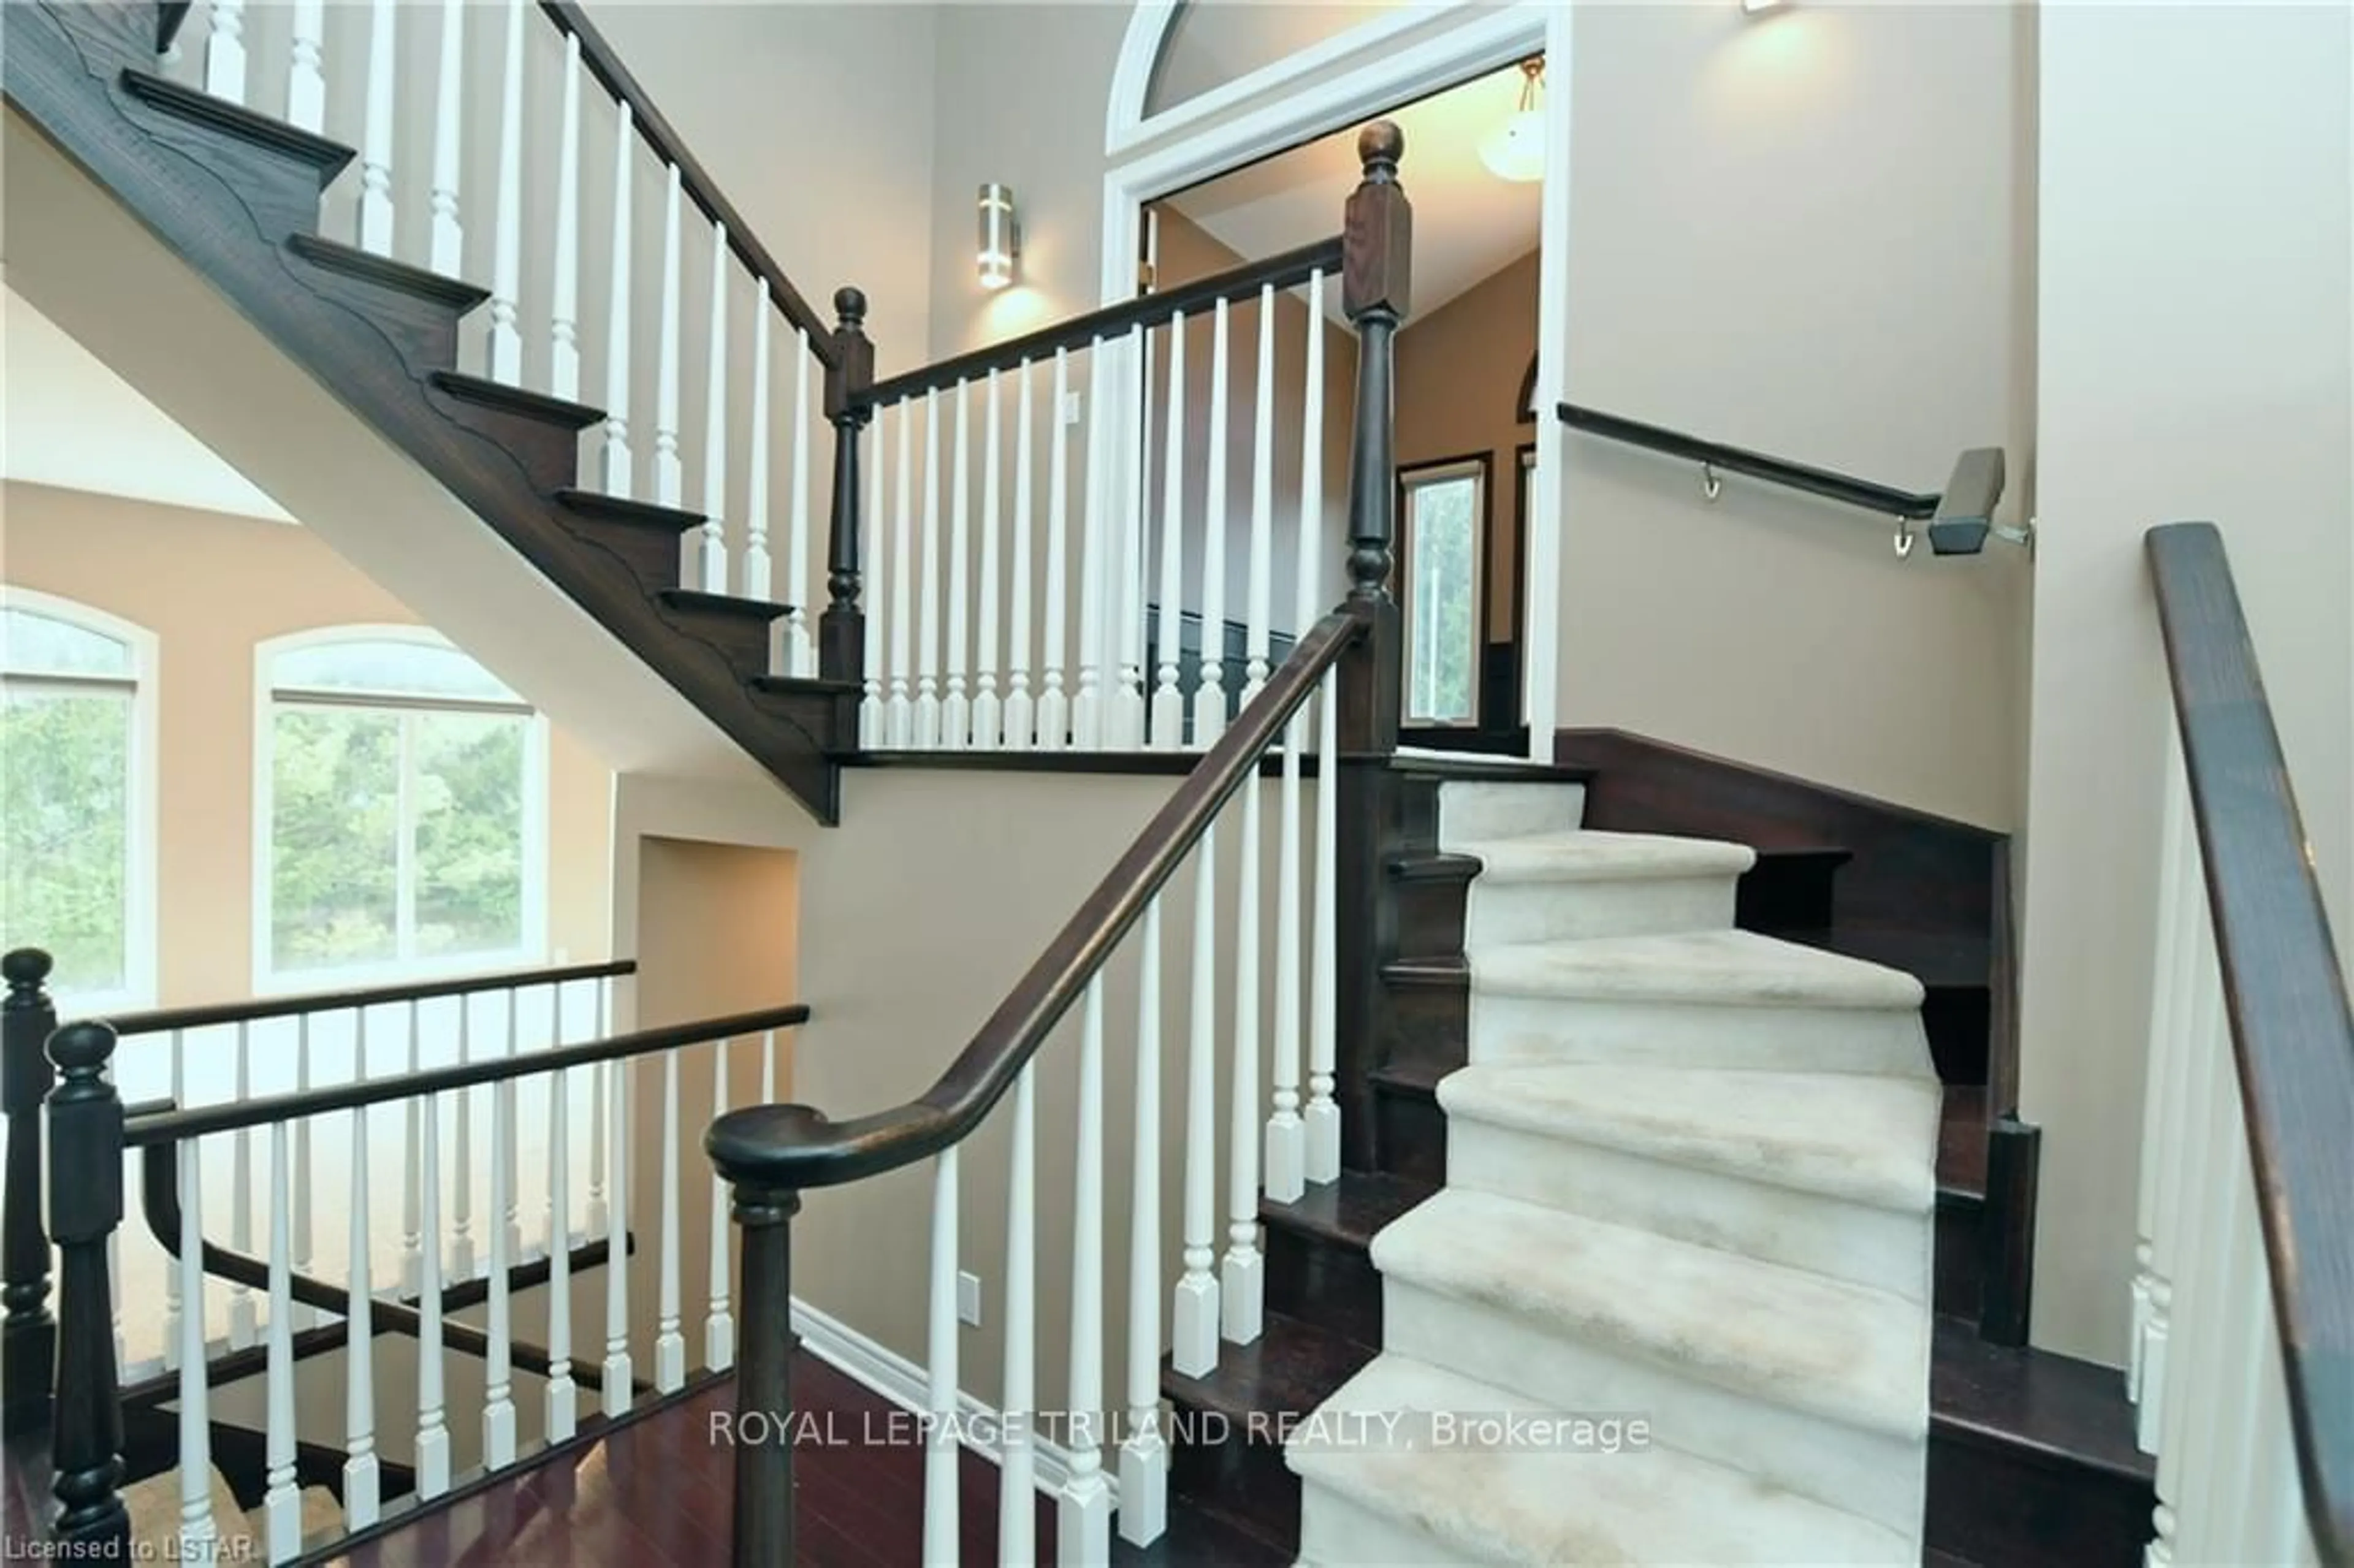 Stairs for 22 Mcintosh Crt, London Ontario N6C 6A7